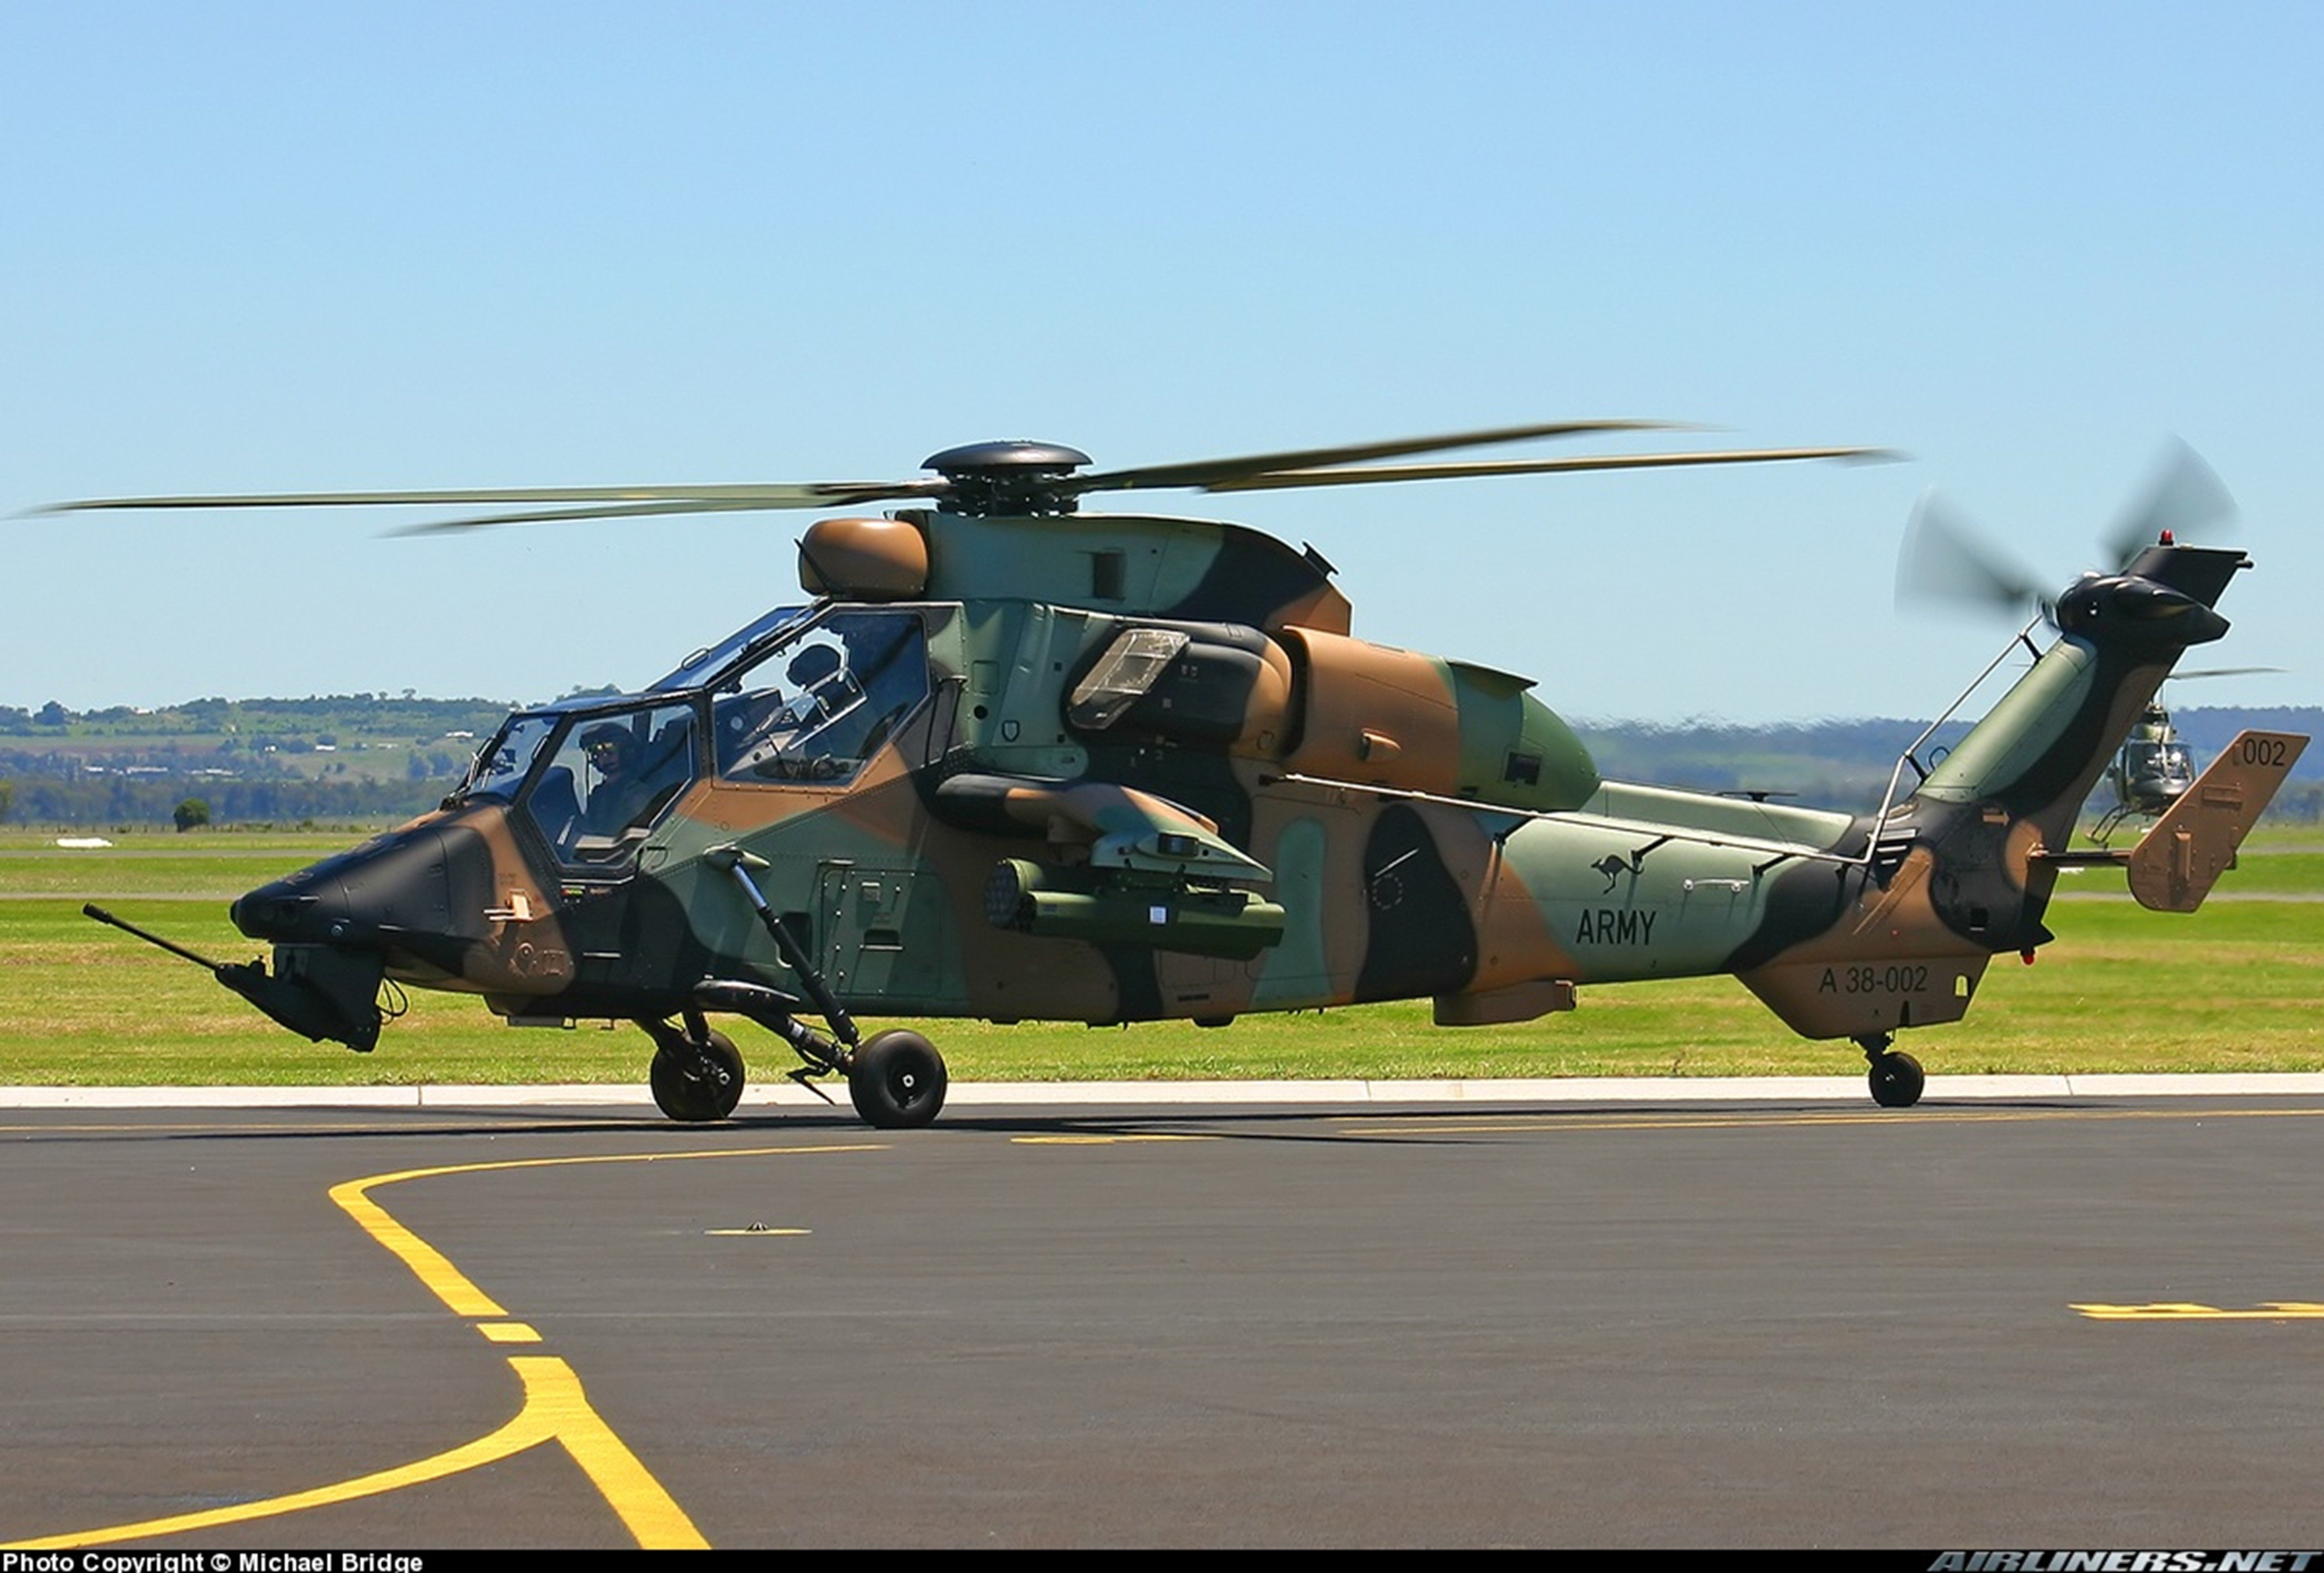 helicopter, Aircraft, Attack, Military, Army, Eurocopter, Tiger, Australia Wallpaper